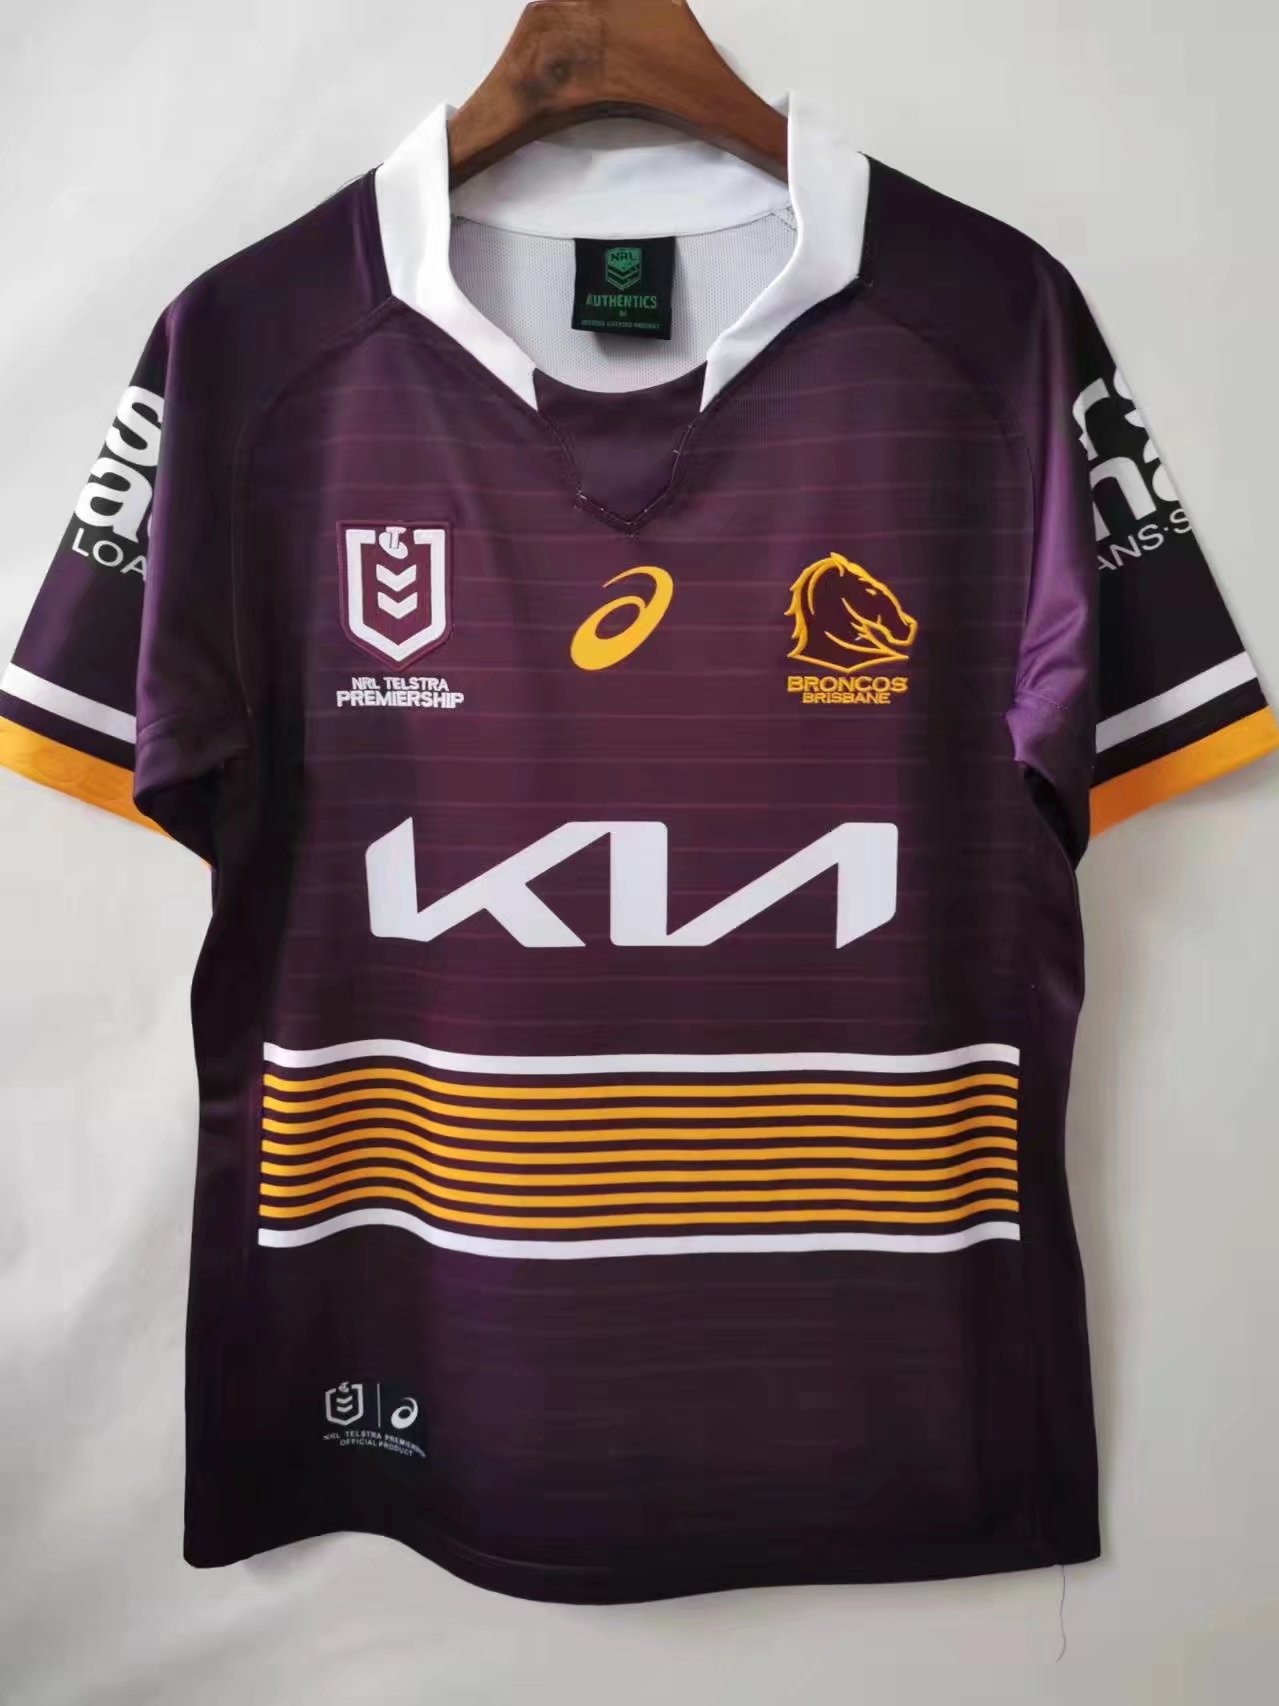 2022 Broncos Yellow & Purple Thailand Rugby Shirts-805